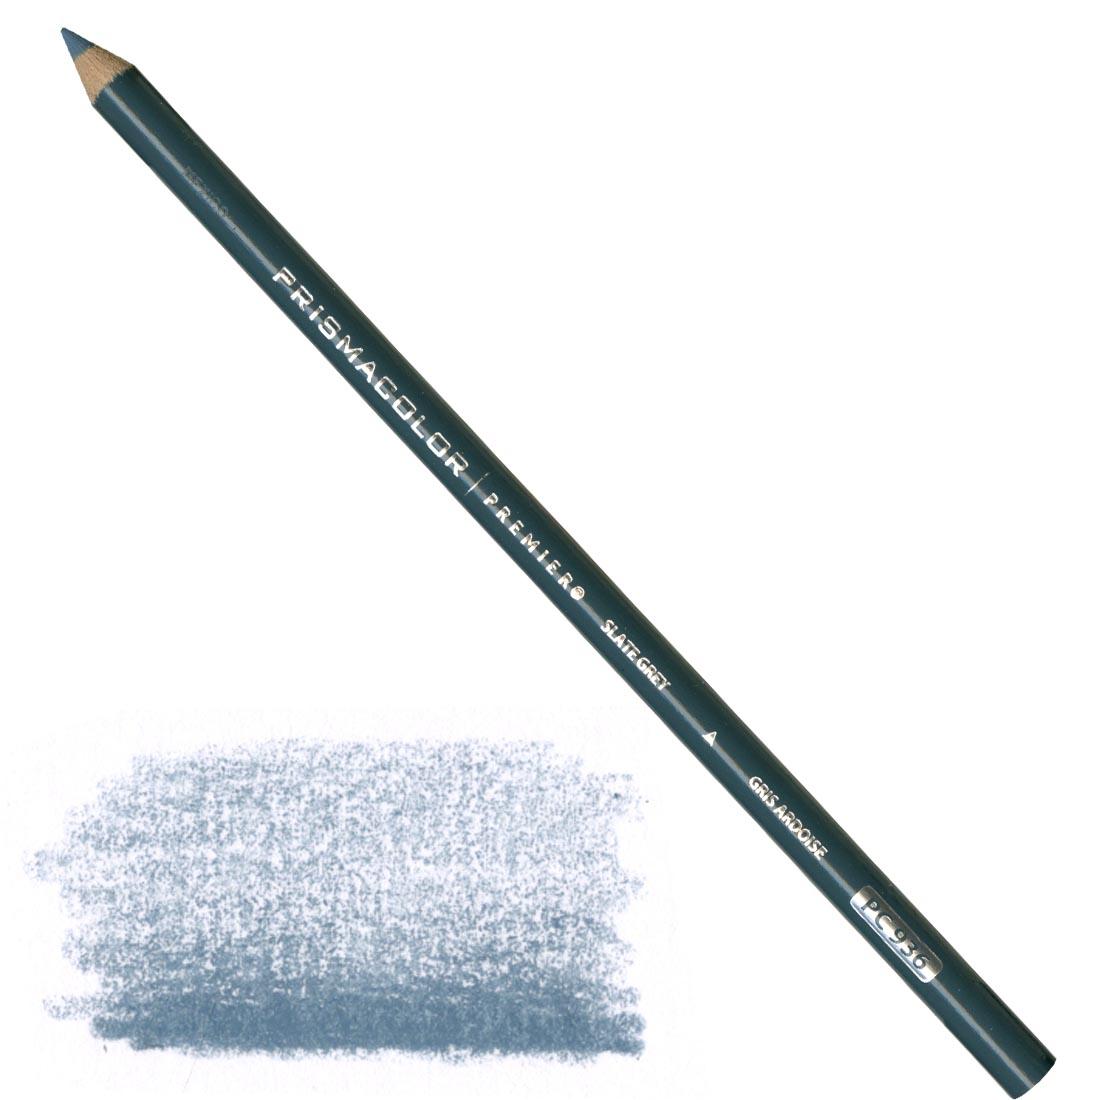 Slate Grey Prismacolor Premier Colored Pencil with a sample colored swatch